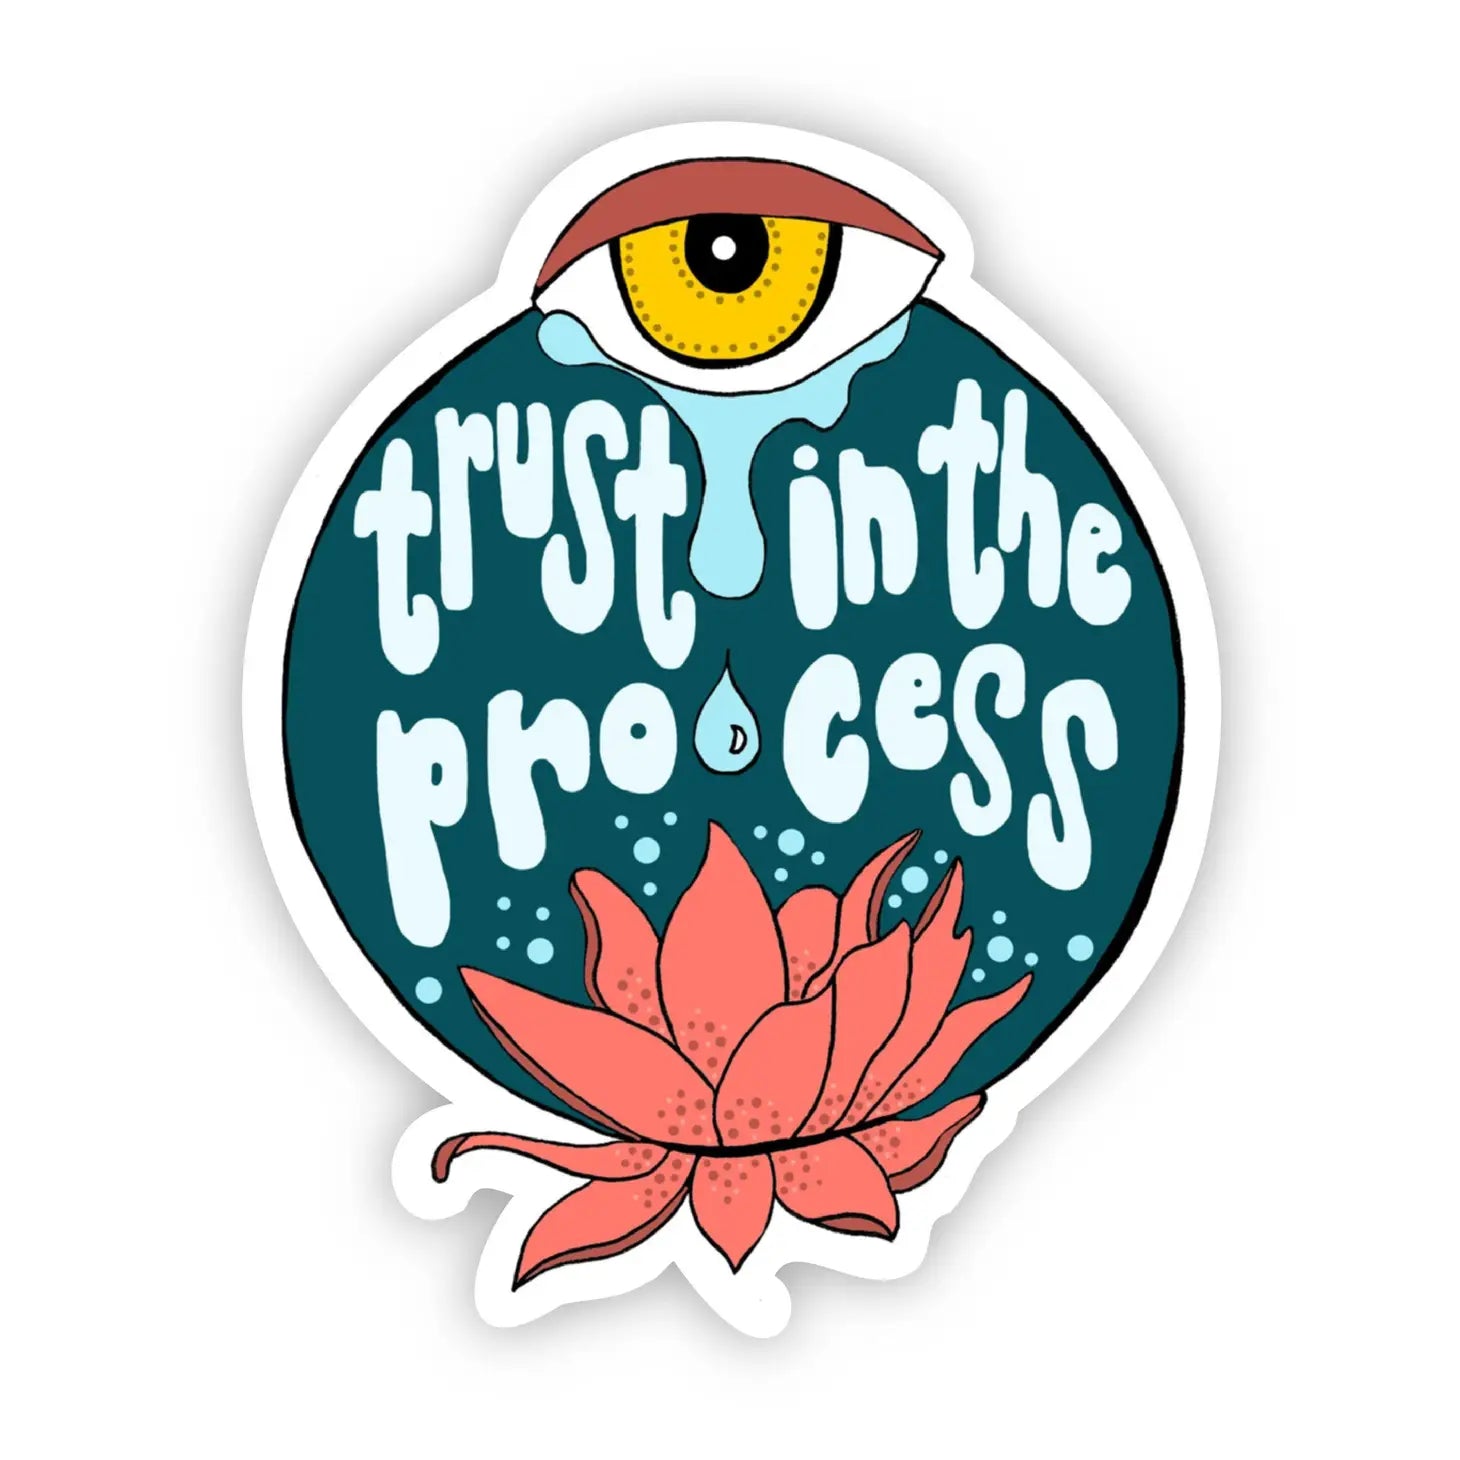 Trust in The Process Eye Sticker - Moon Room Shop and Wellness